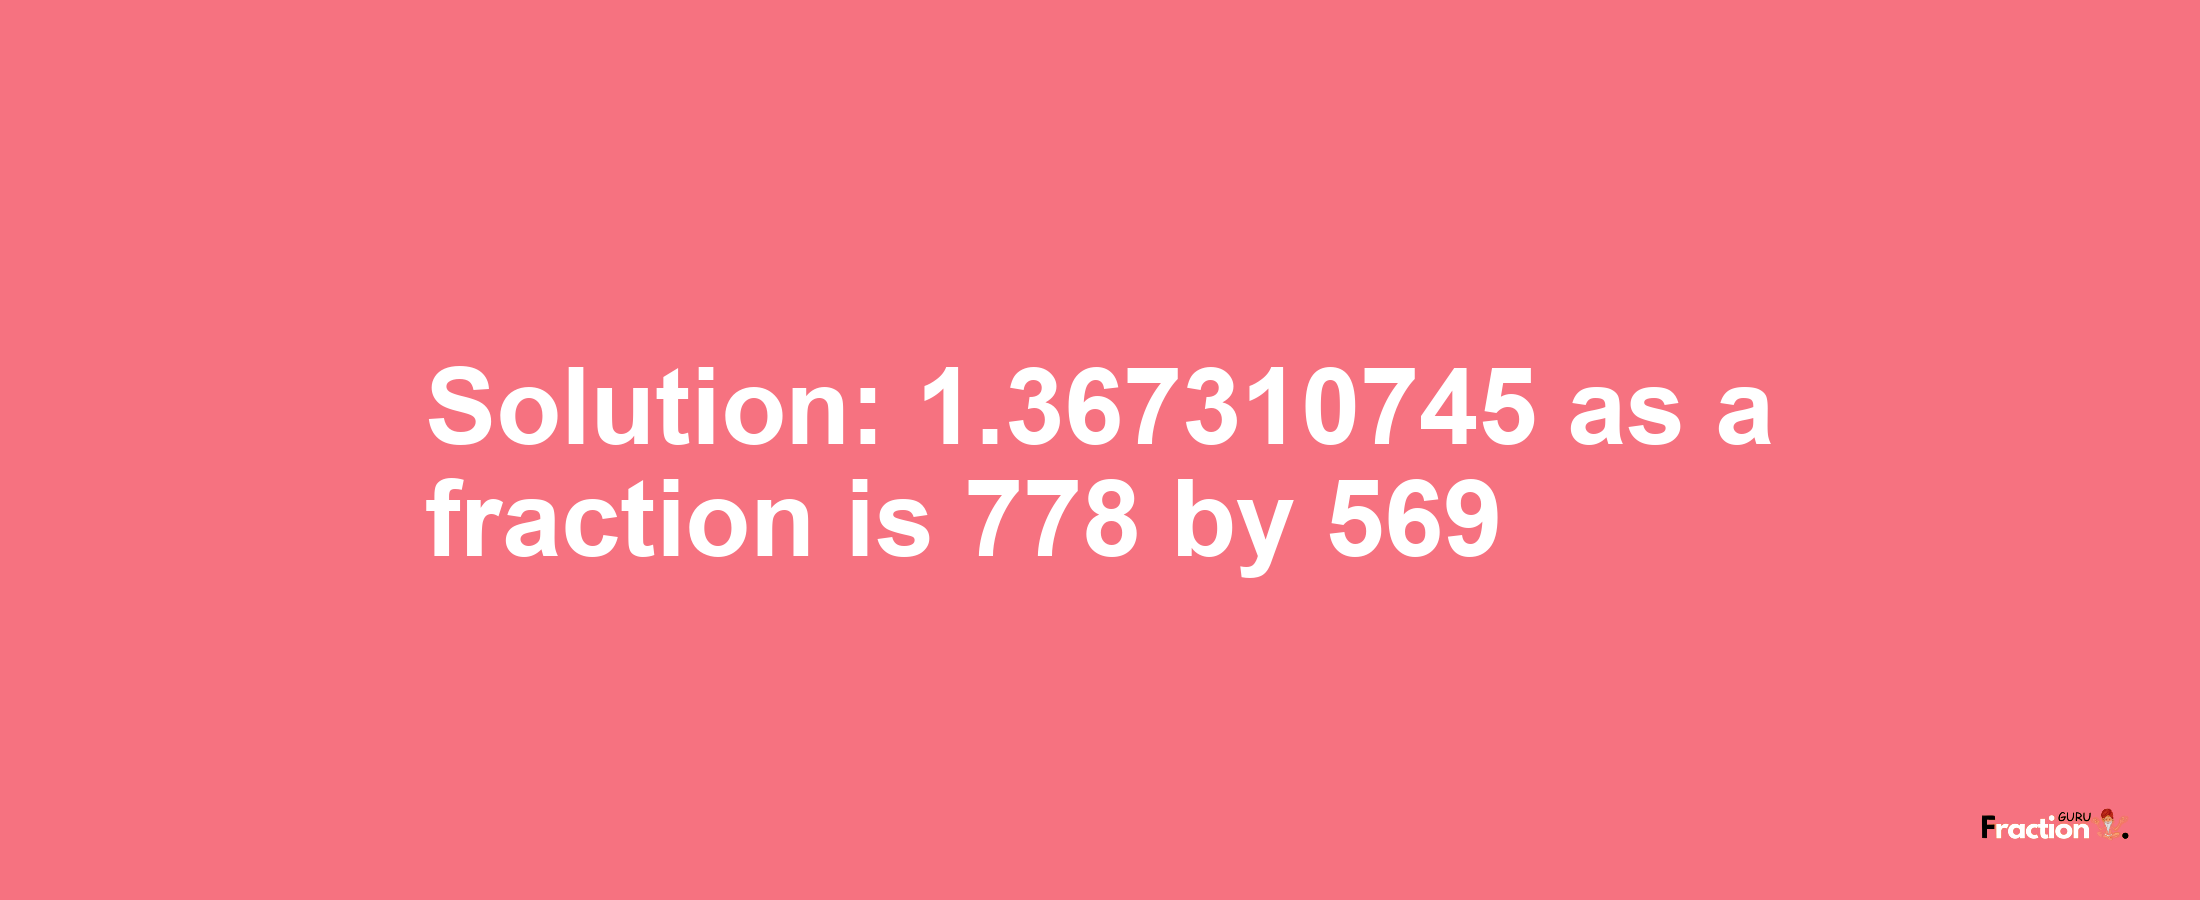 Solution:1.367310745 as a fraction is 778/569